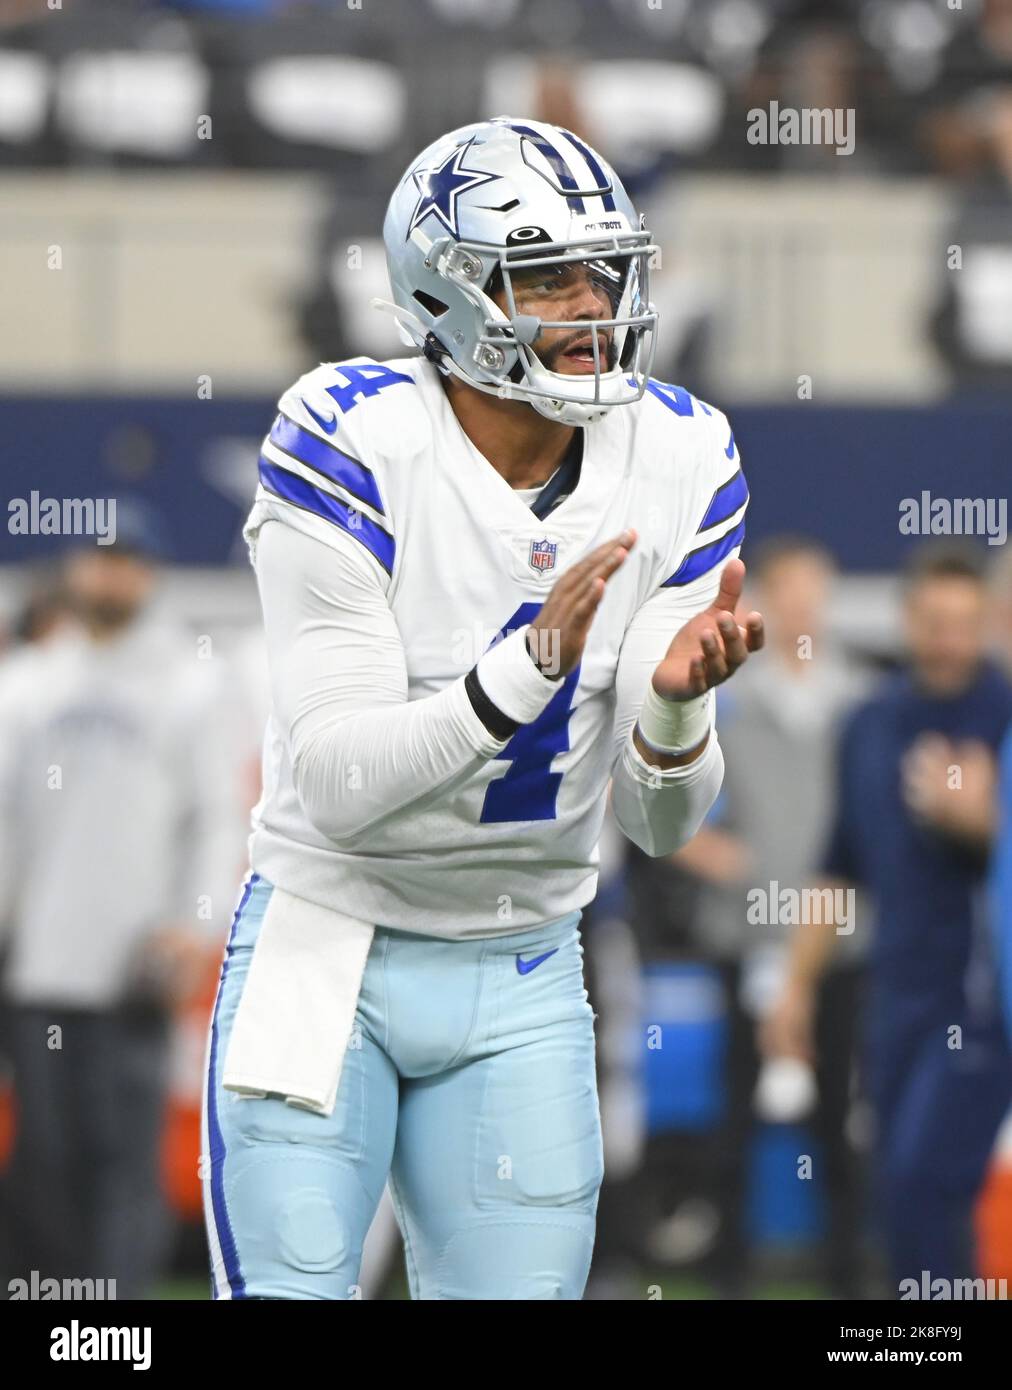 Arlington, United States. 23rd Oct, 2022. Dallas Cowboys quarterback Dak Prescott warms up prior to facing the Detroit Lions at AT&T Stadium in Arlington, Texas on Sunday, October 23, 2022. Prescott is making his first start since missing five games with a broken thumb in the season opener, Photo by Ian Halperin/UPI Credit: UPI/Alamy Live News Stock Photo